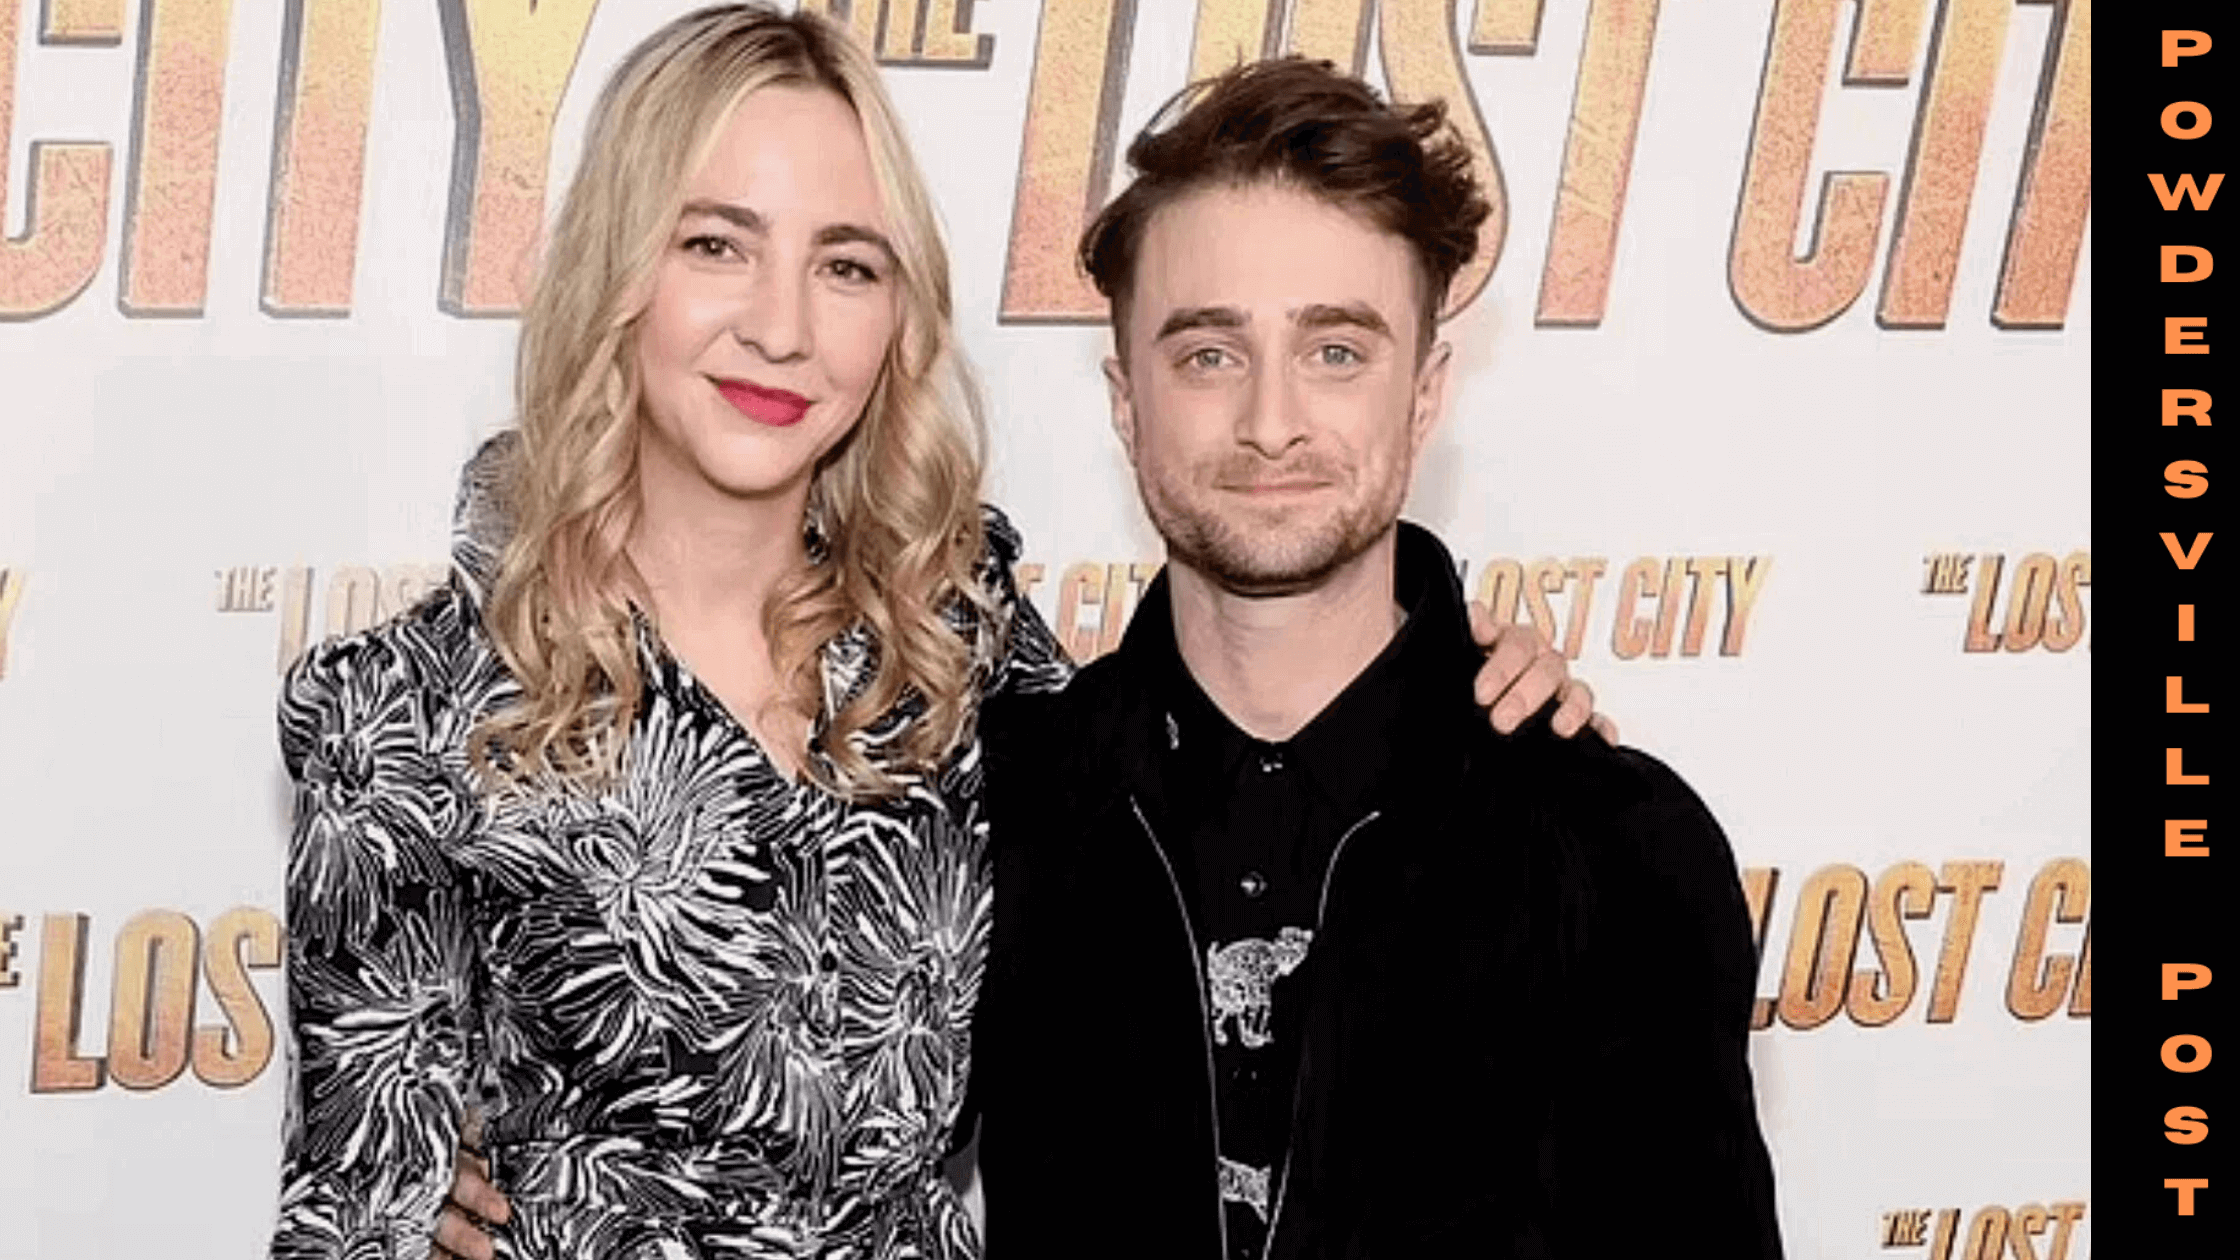 Rumored Couple Erin Drake And Daniel Radcliffe Attend A Screening Of 'Lost City' Together